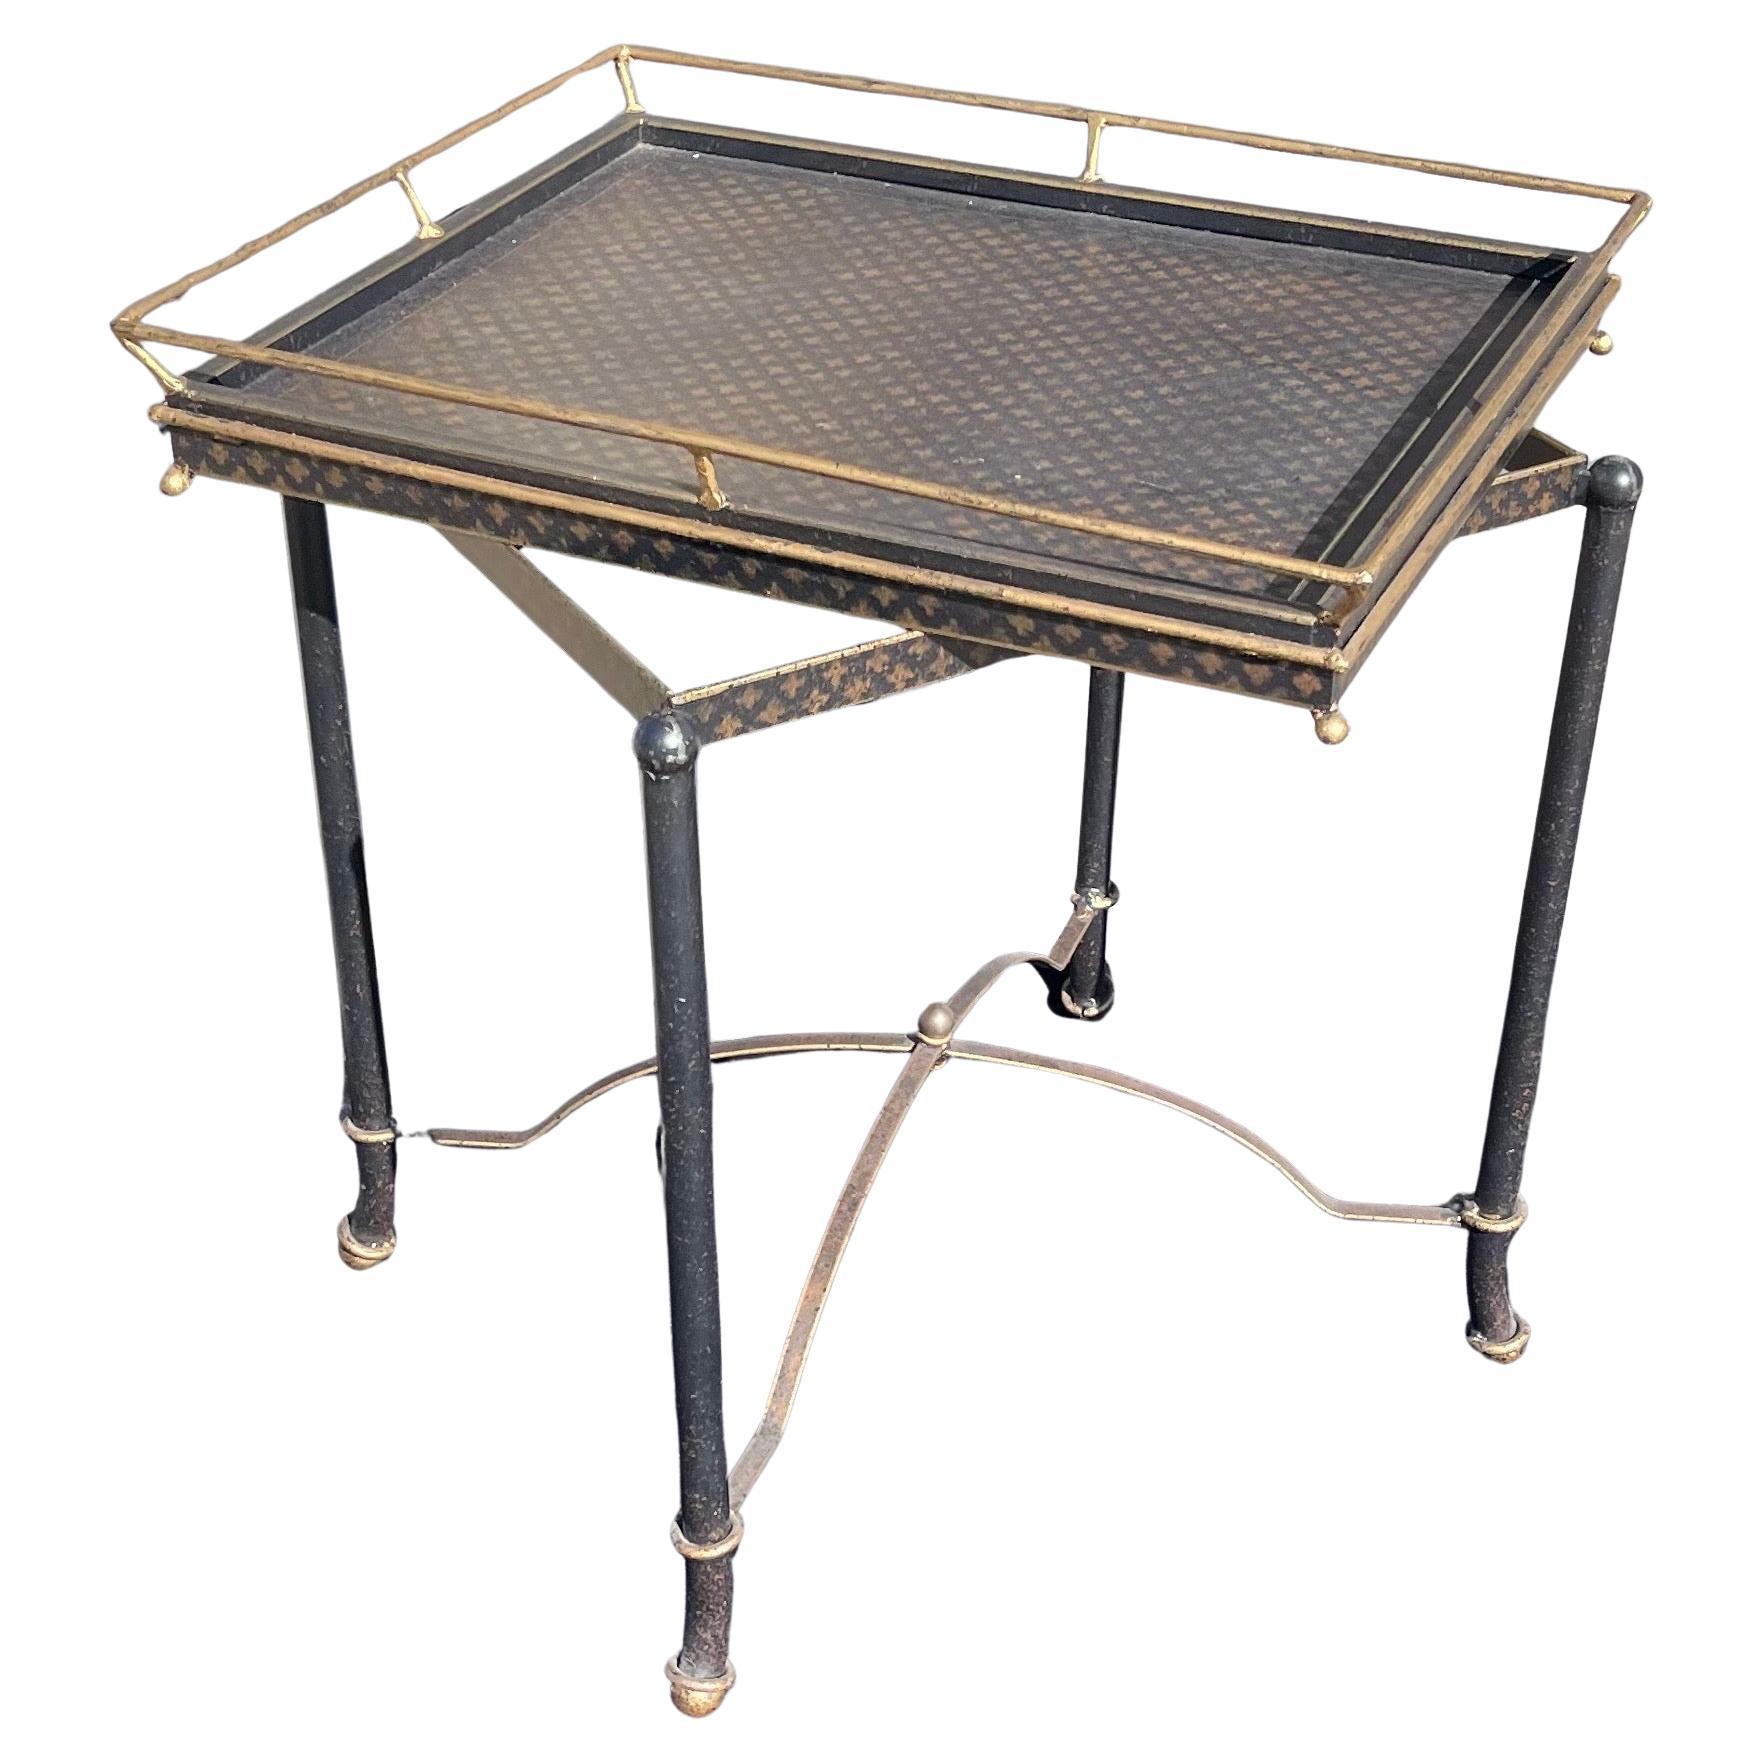 A Wonderful Hand Painted Black & Gold Removable Tray Top Tole Coffee / Cocktail / Side Table